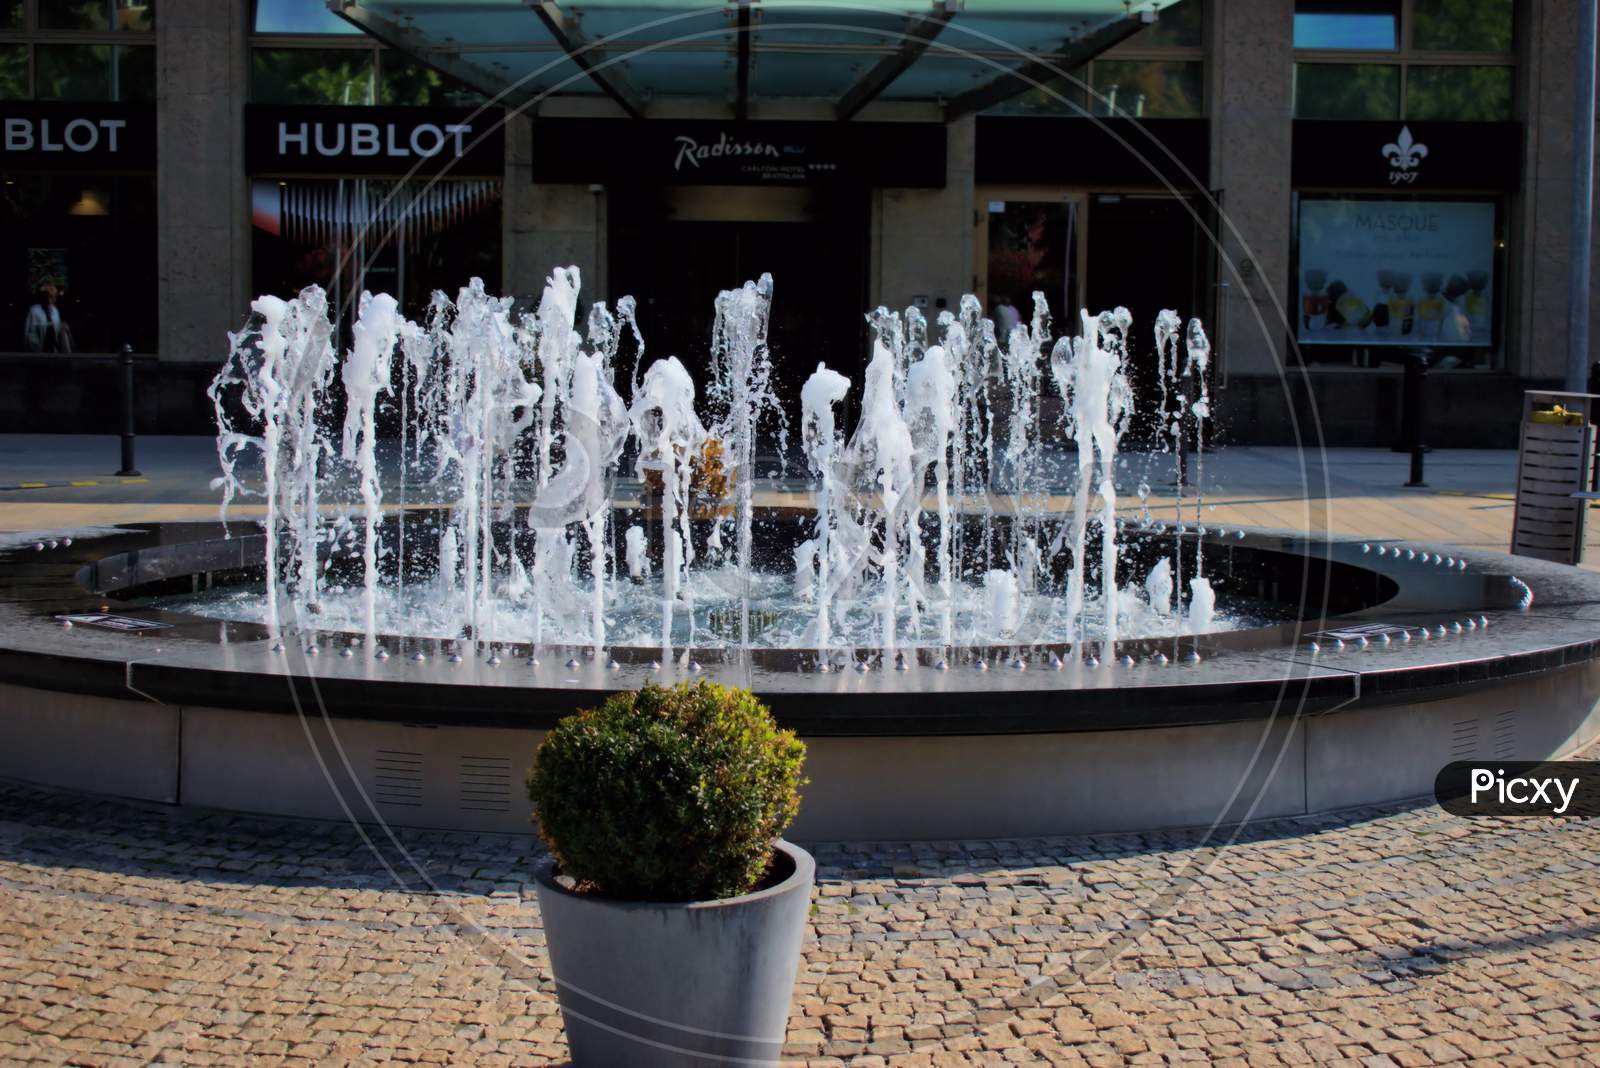 Waterfountain in front of the Radisson blue hotel in Bratislava in Slovakia 11.9.2020